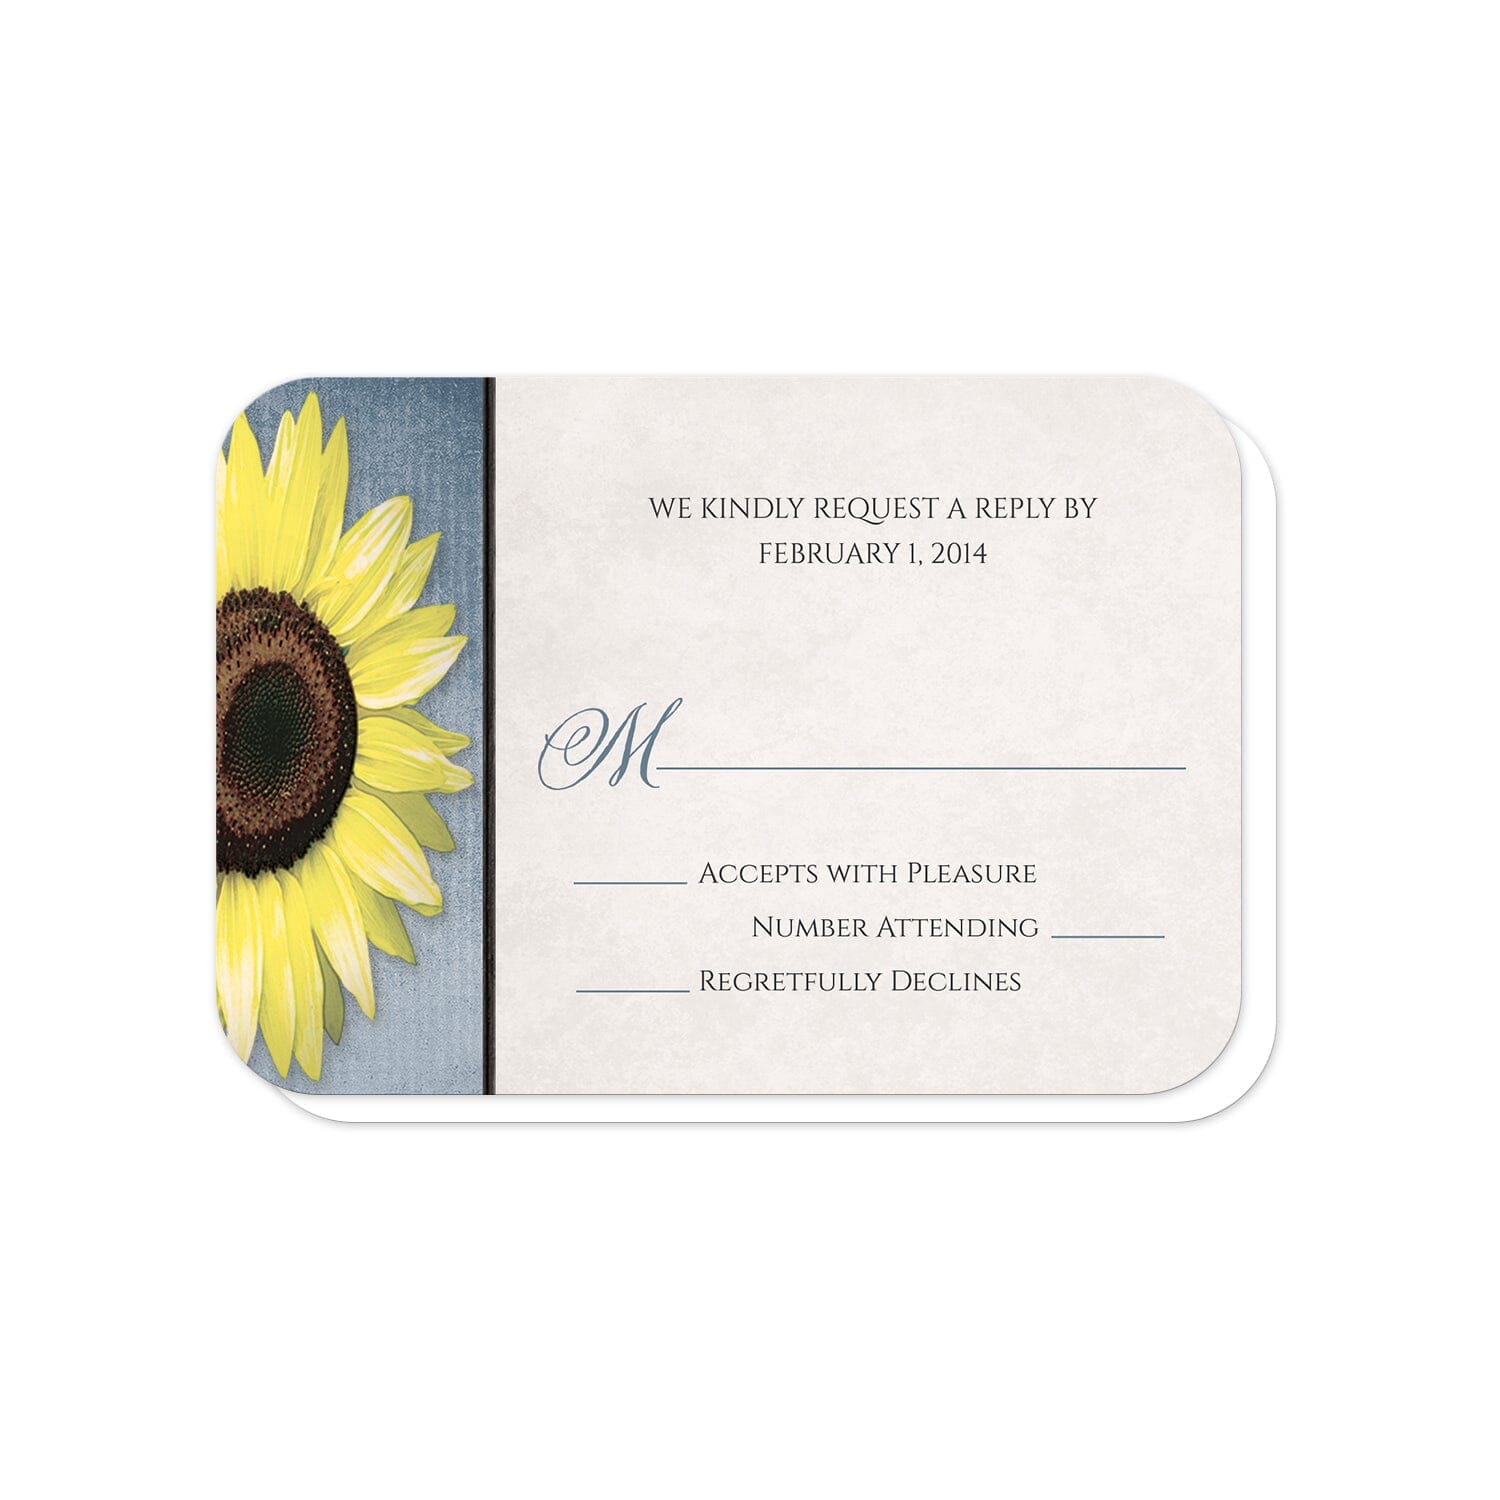 Sunflower Rustic Mason Jar Blue RSVP Cards (with rounded corners) at Artistically Invited.